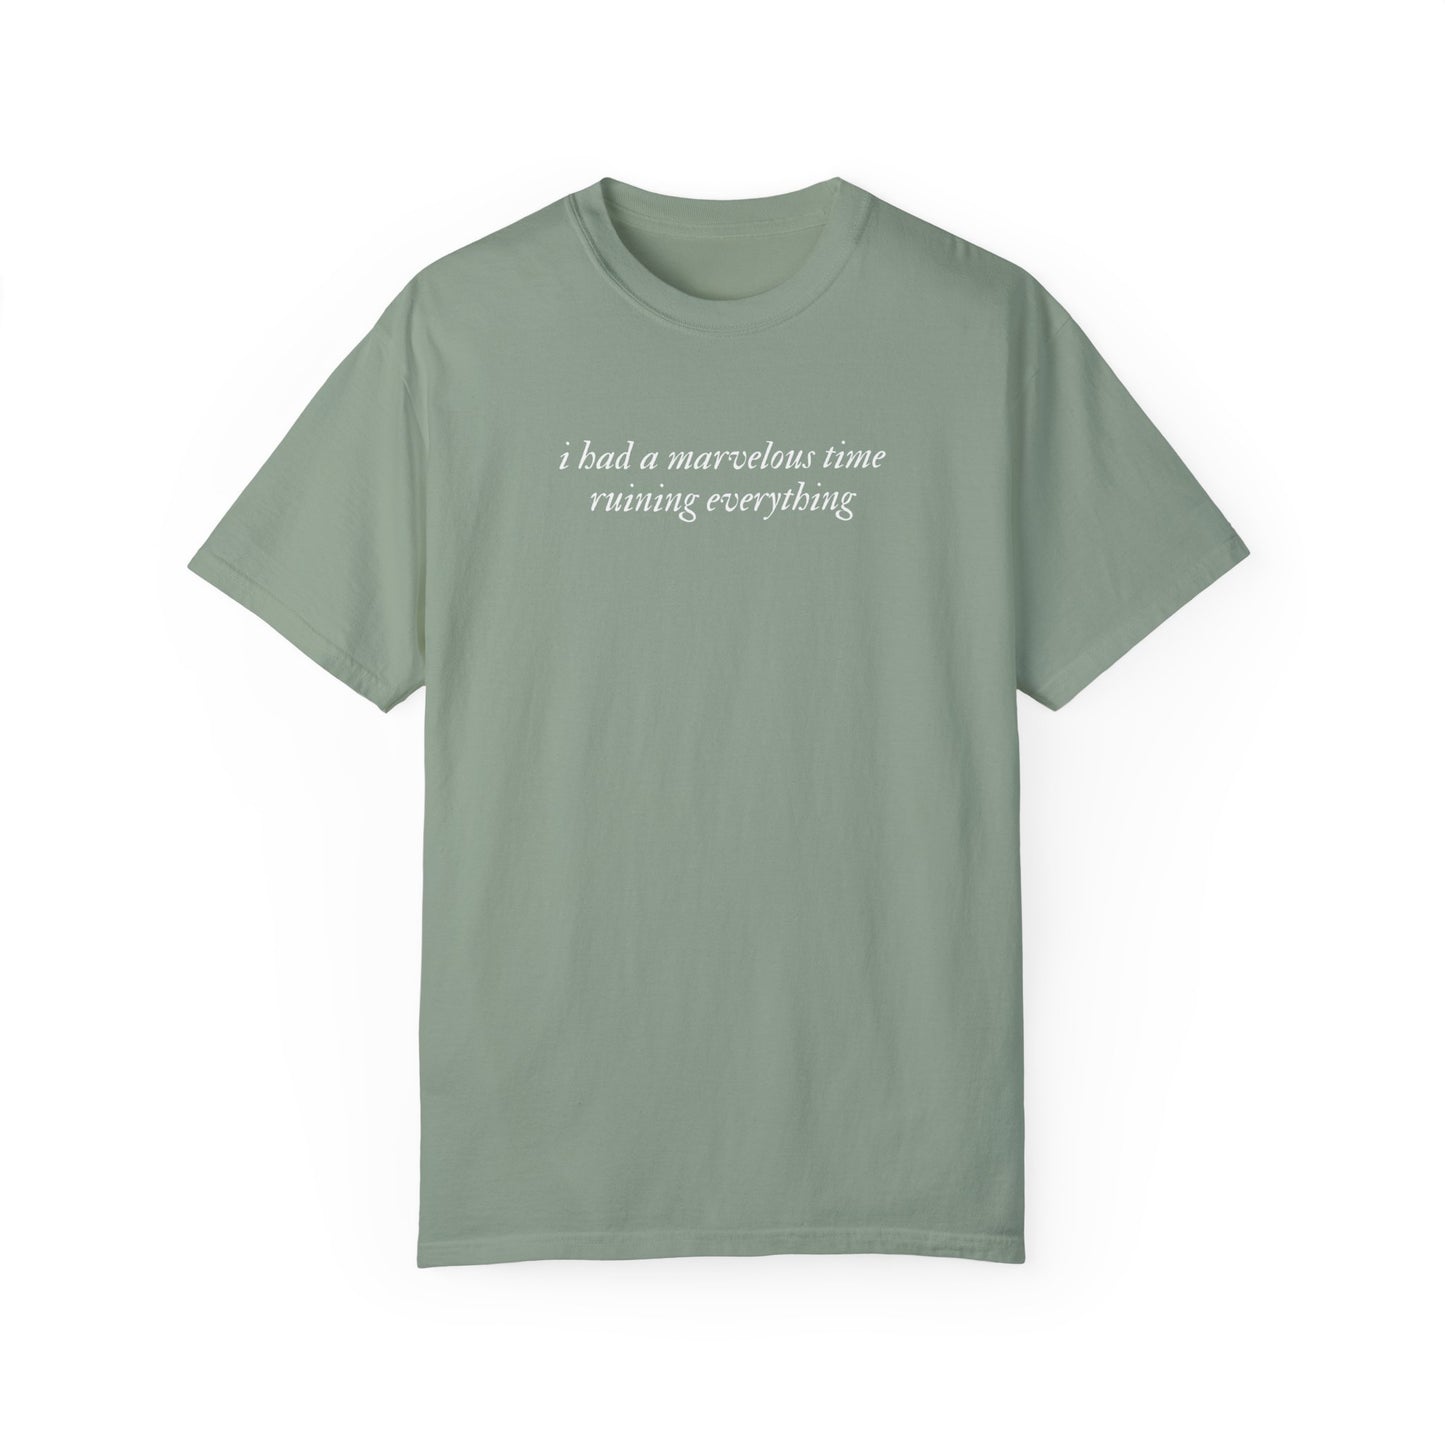 A Marvelous Time Shirt